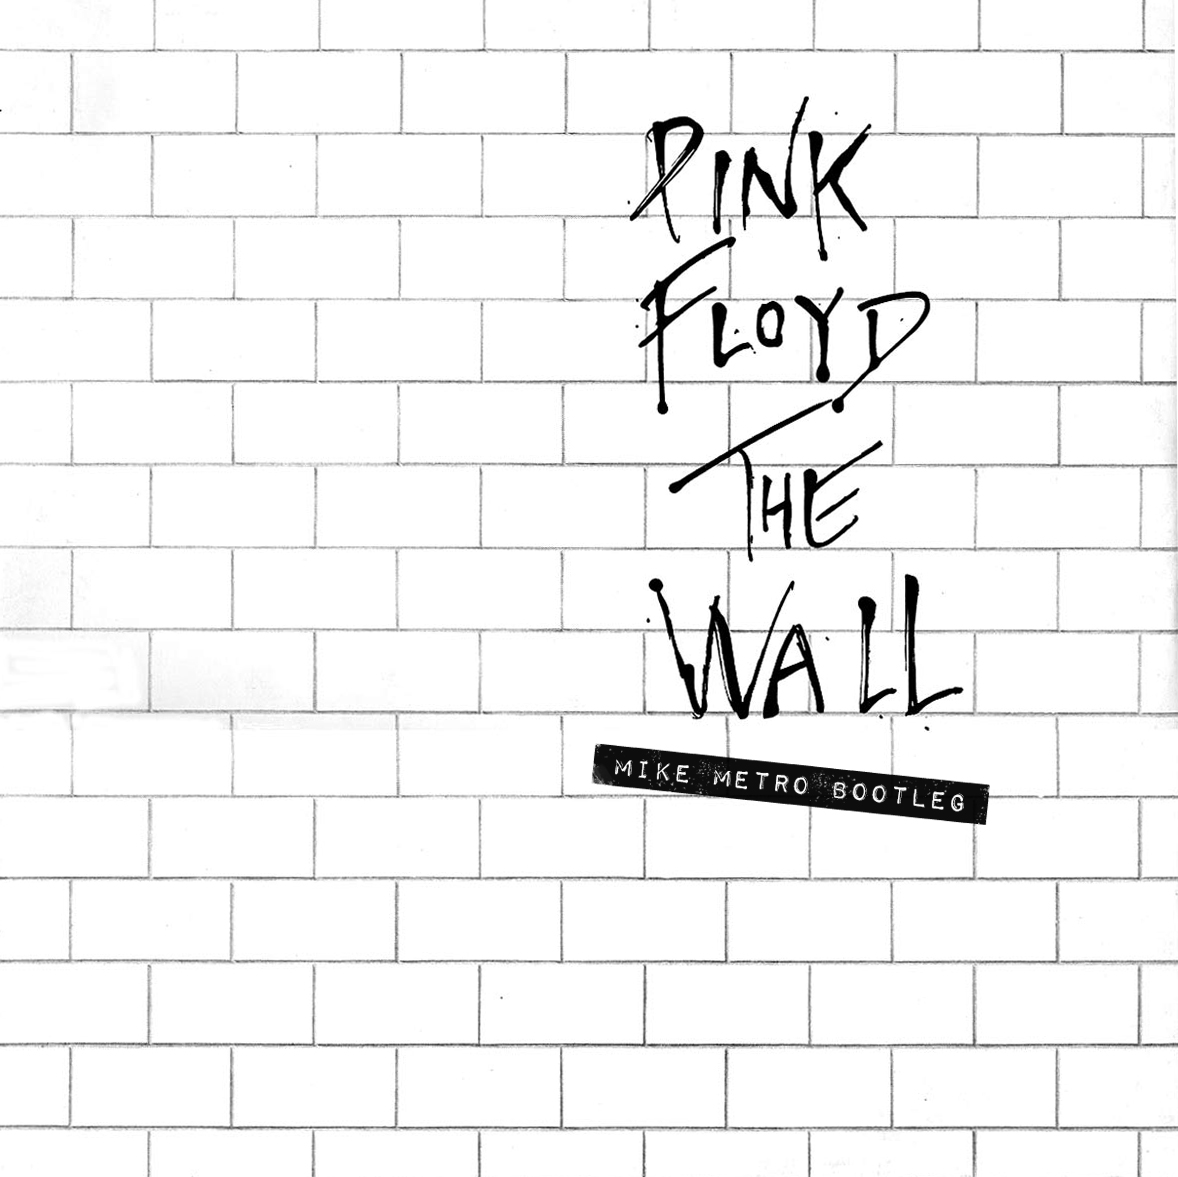 Pink Floyd - Another Brick In The Wall - Mike Metro Bootleg - Download